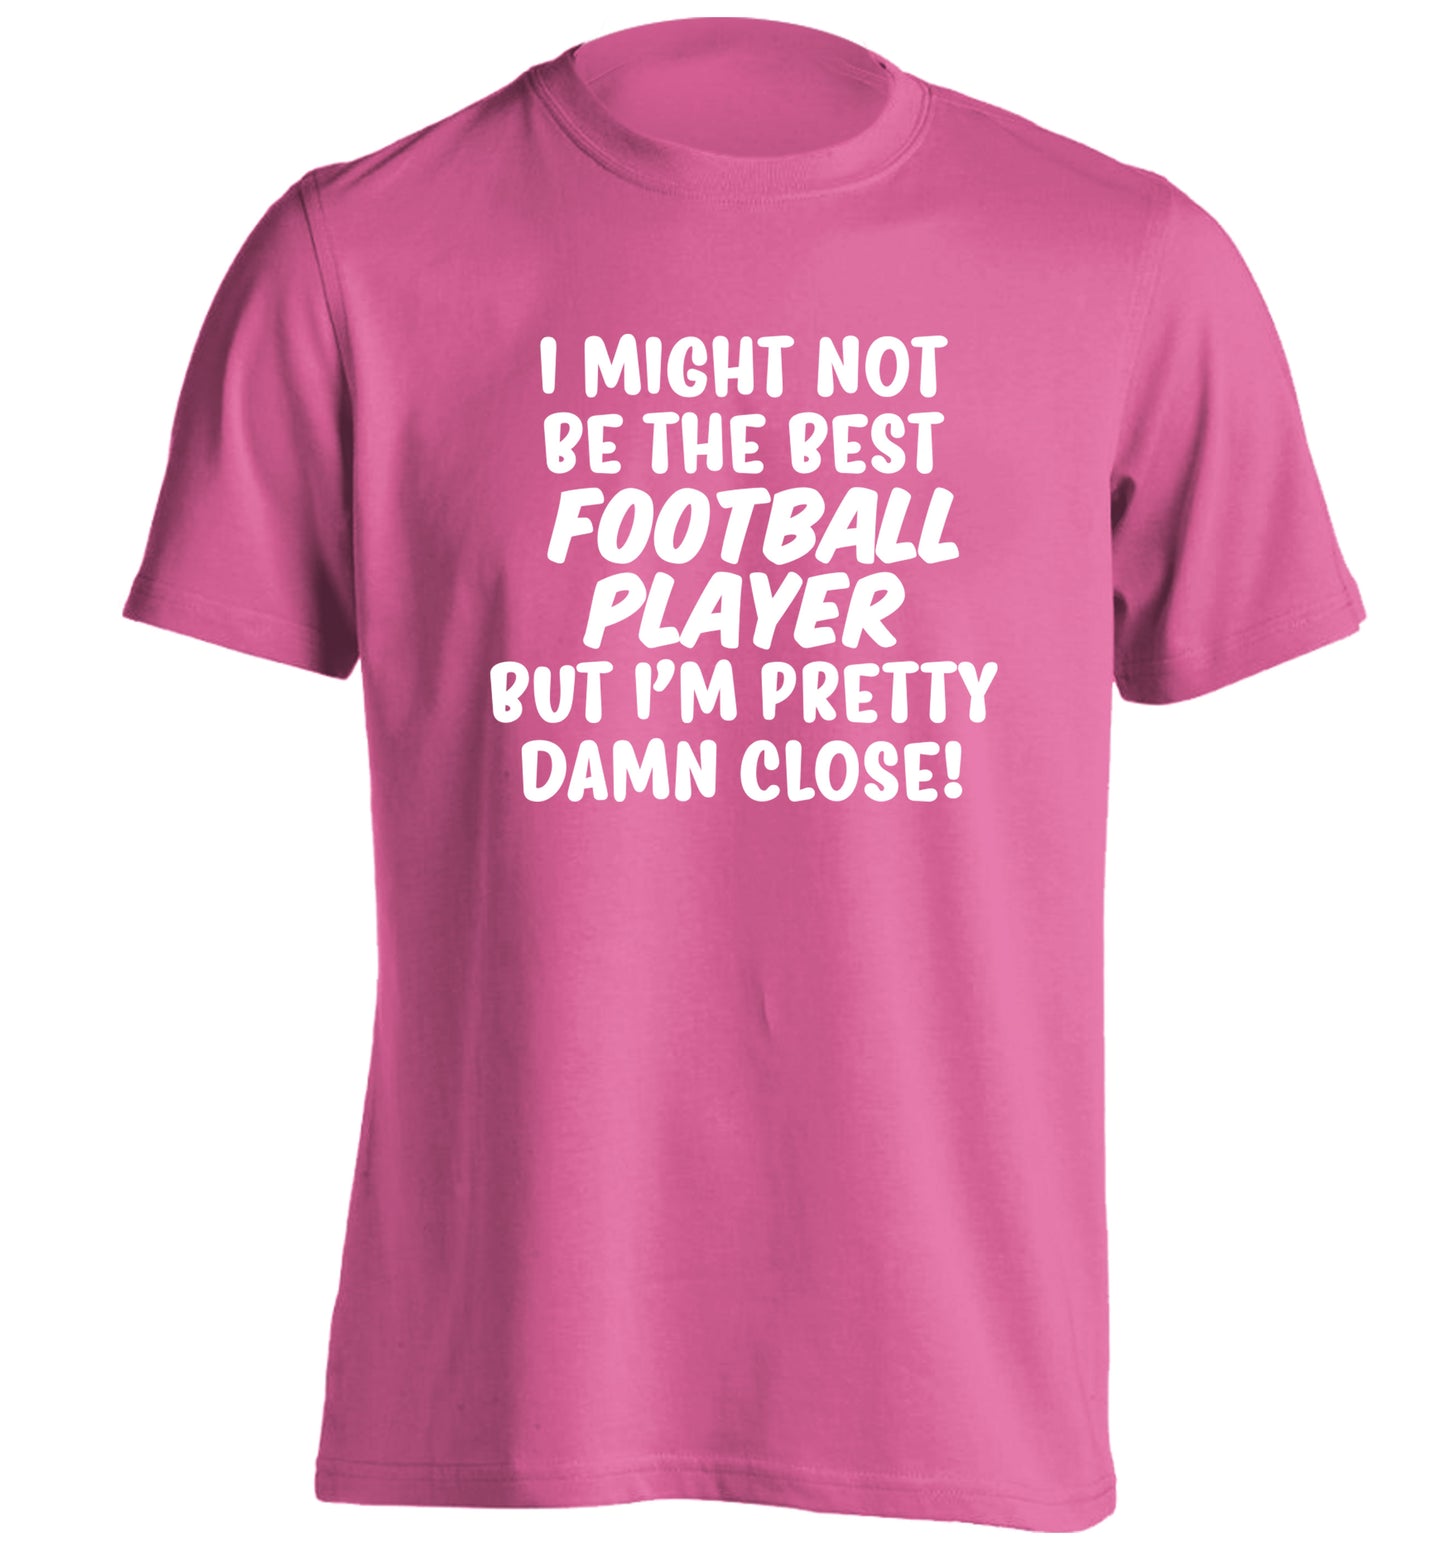 I might not be the best football player but I'm pretty close! adults unisexpink Tshirt 2XL